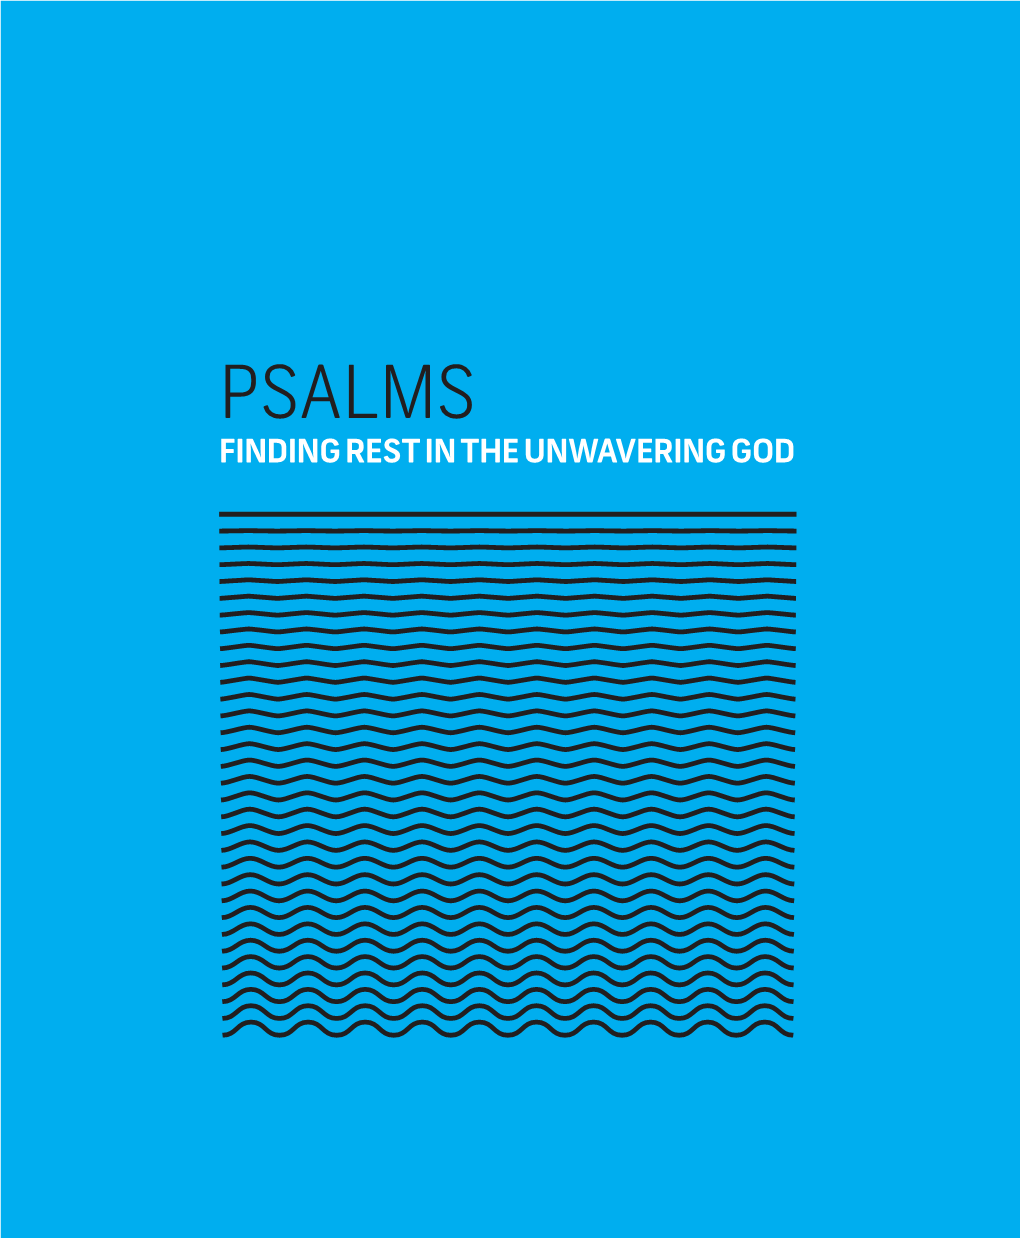 Psalms Finding Rest in the Unwavering God